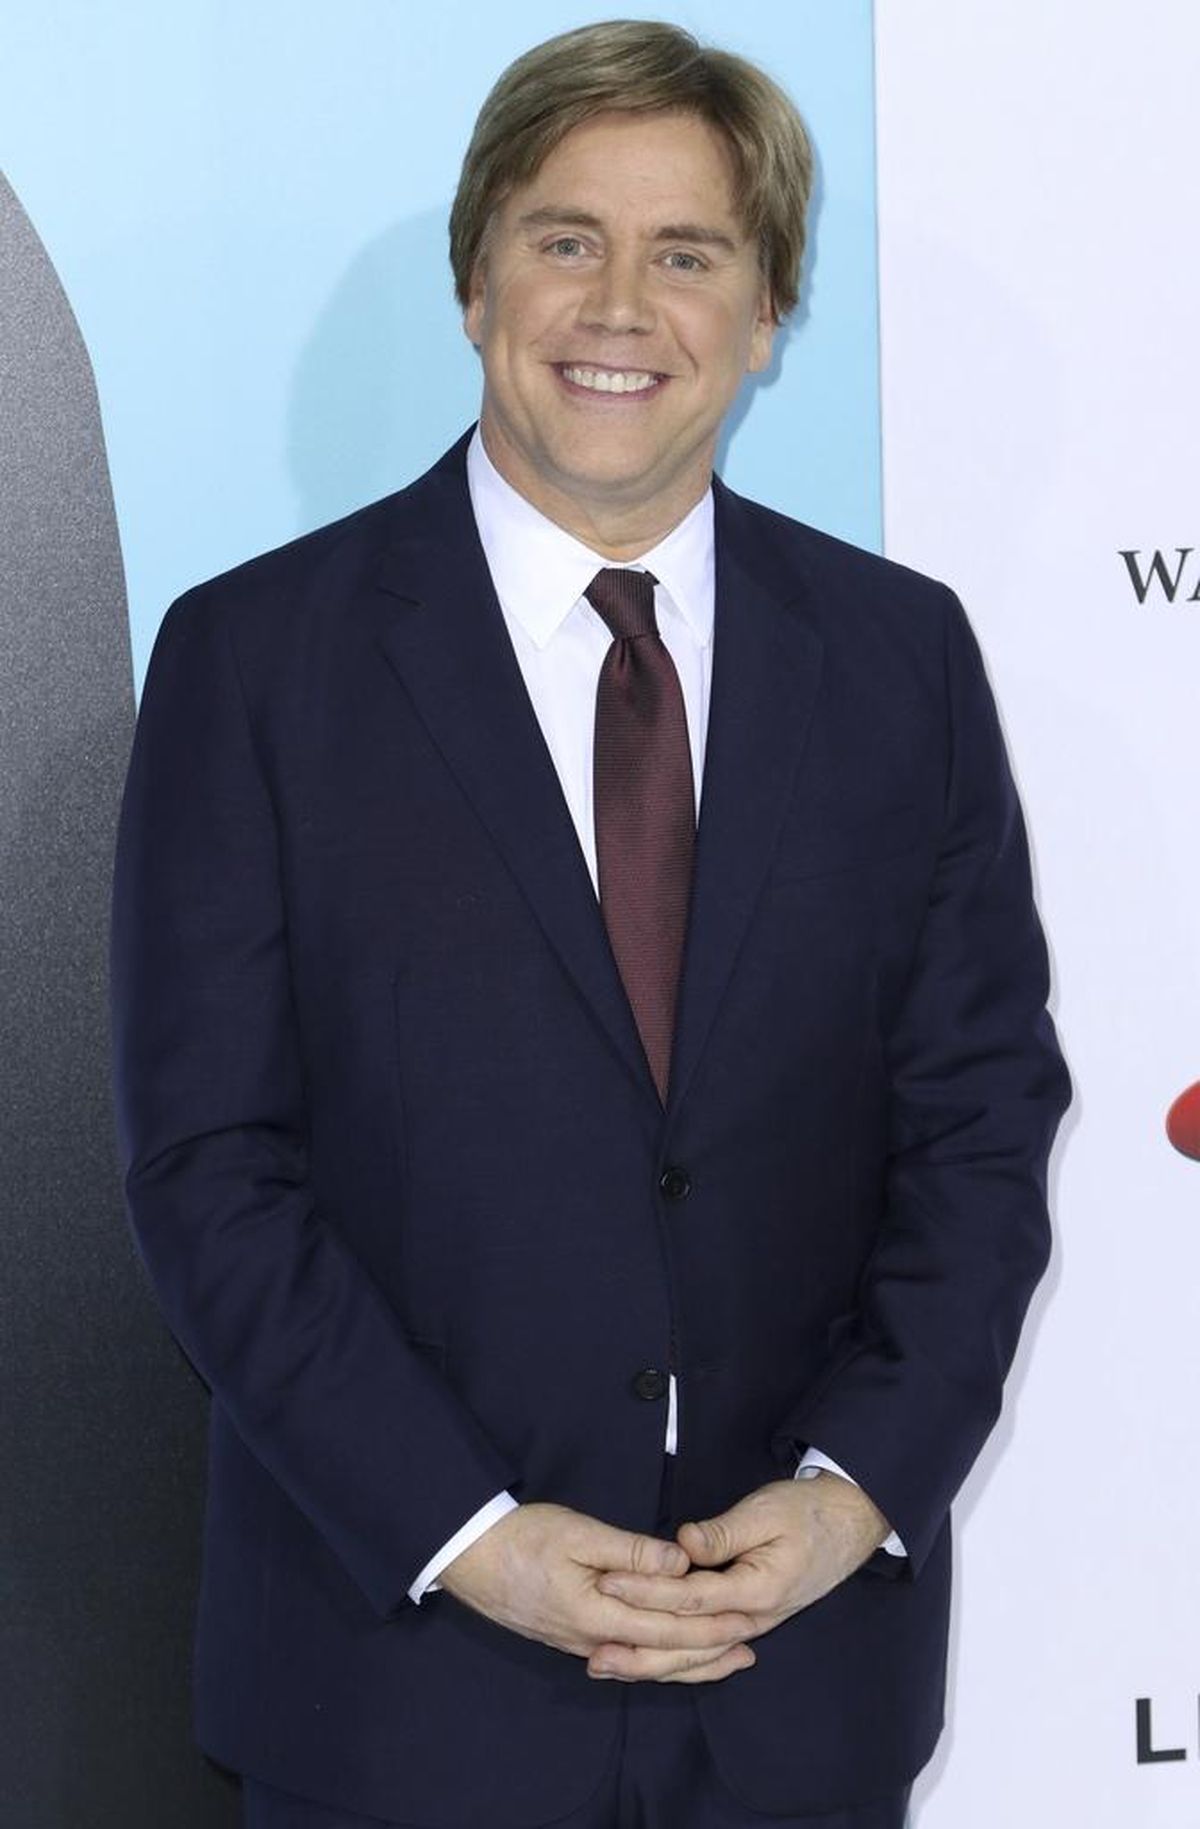 Author and director Stephen Chbosky, shown at the Los Angeles premiere of “Wonder” in 2017, has published his second book, “Imaginary Friend.” (Willy Sanjuan / Associated Press)